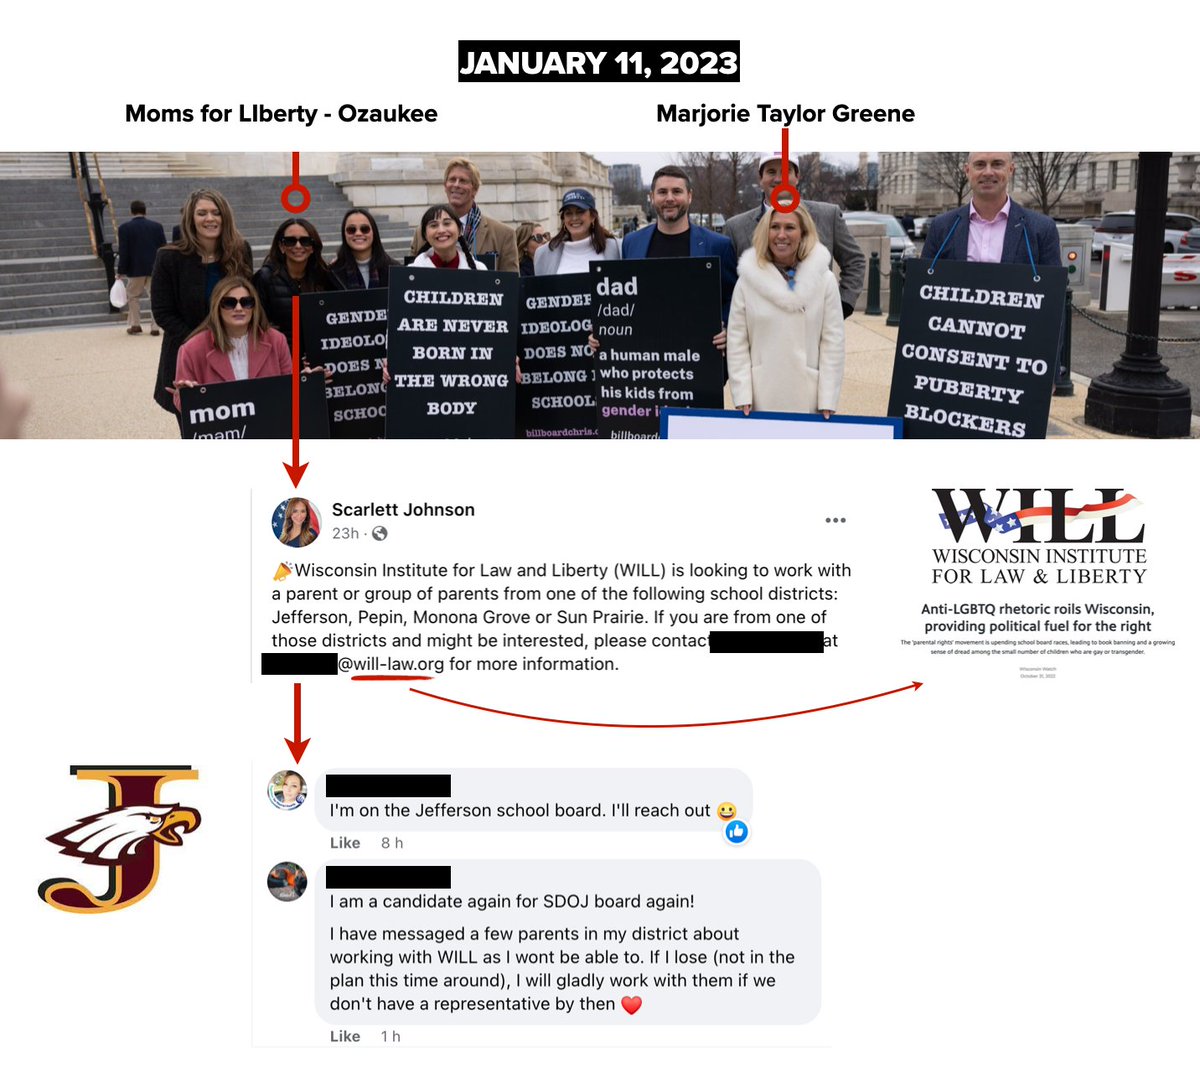 January is turning out to be a busy month for right wing anti-LGBTQ, anti-public school GOP operatives from #Wisconsin.
In DC with 'Empty G', and posting about connecting WILL with school districts. 
A school board member and candidate in #JeffersonWI volunteered!
#Mequon